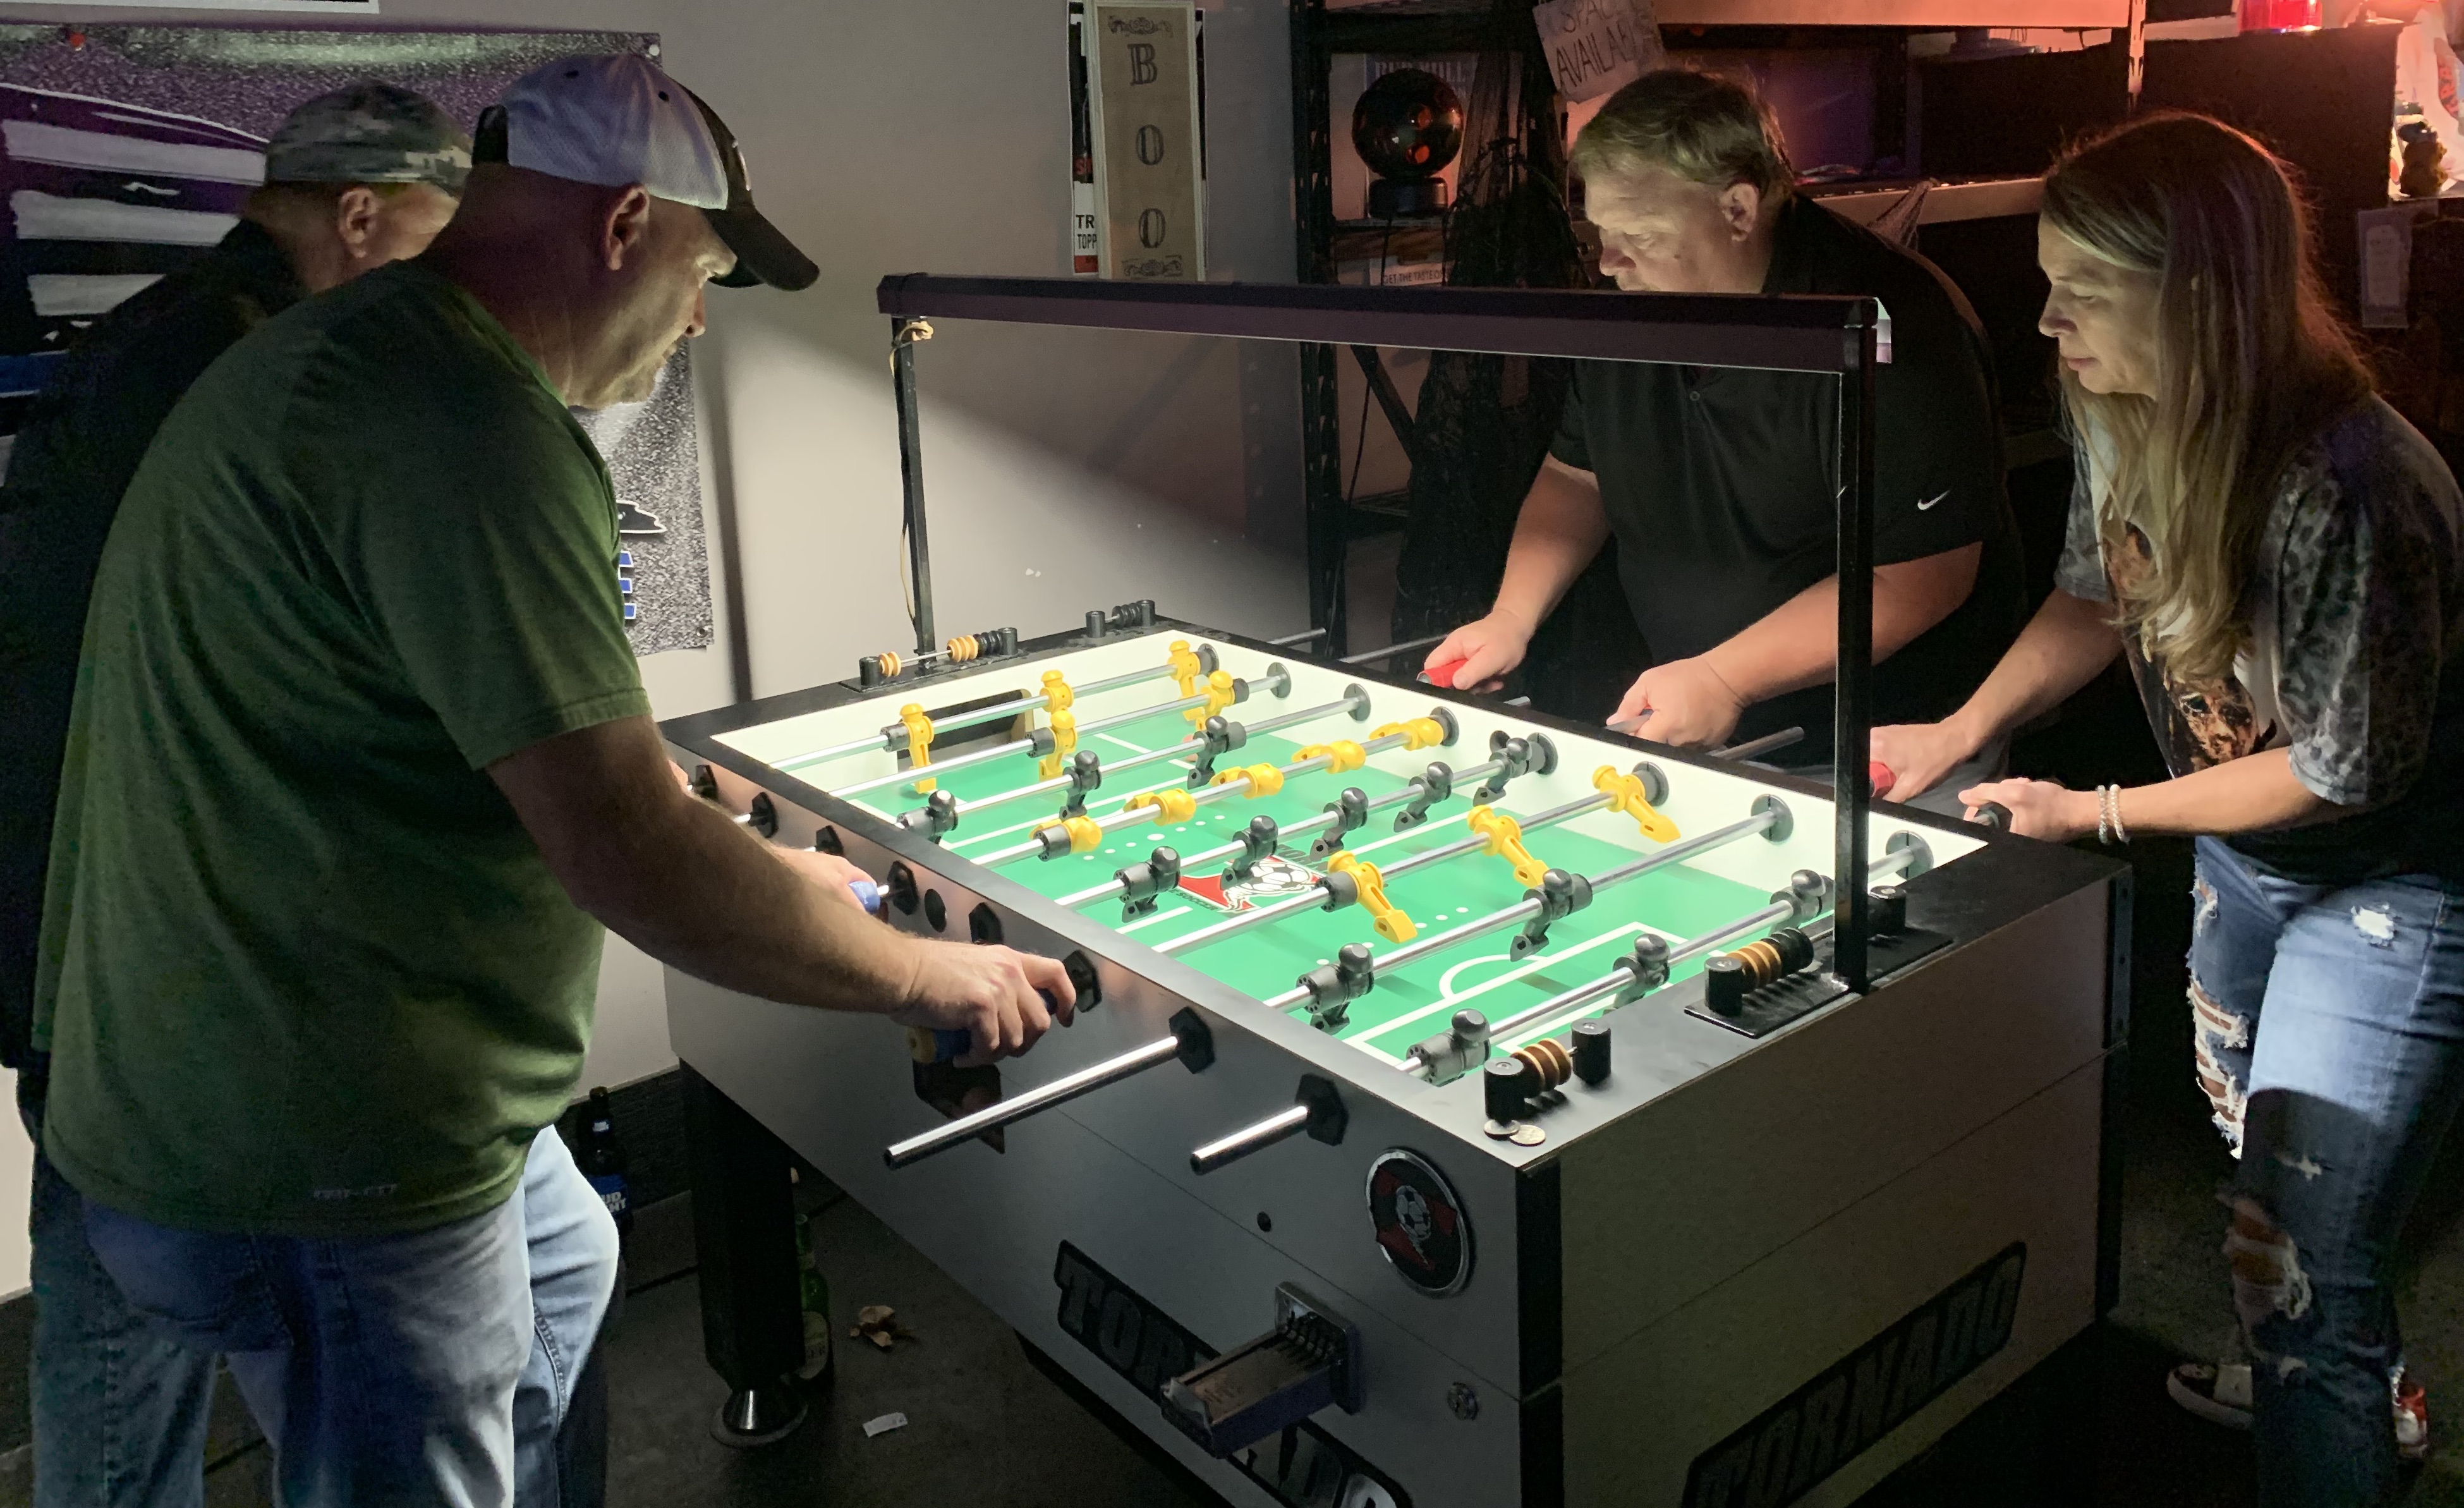 A championship match for the title of the 1st of a series of $200 Added! Foos-Friday events held at Vans Bar in Leeds,AL. this October 28 2022. Steve Dodgen & Mike Camp won the tournament while Bill McBurnett & Kelly Parrett were runners-up.